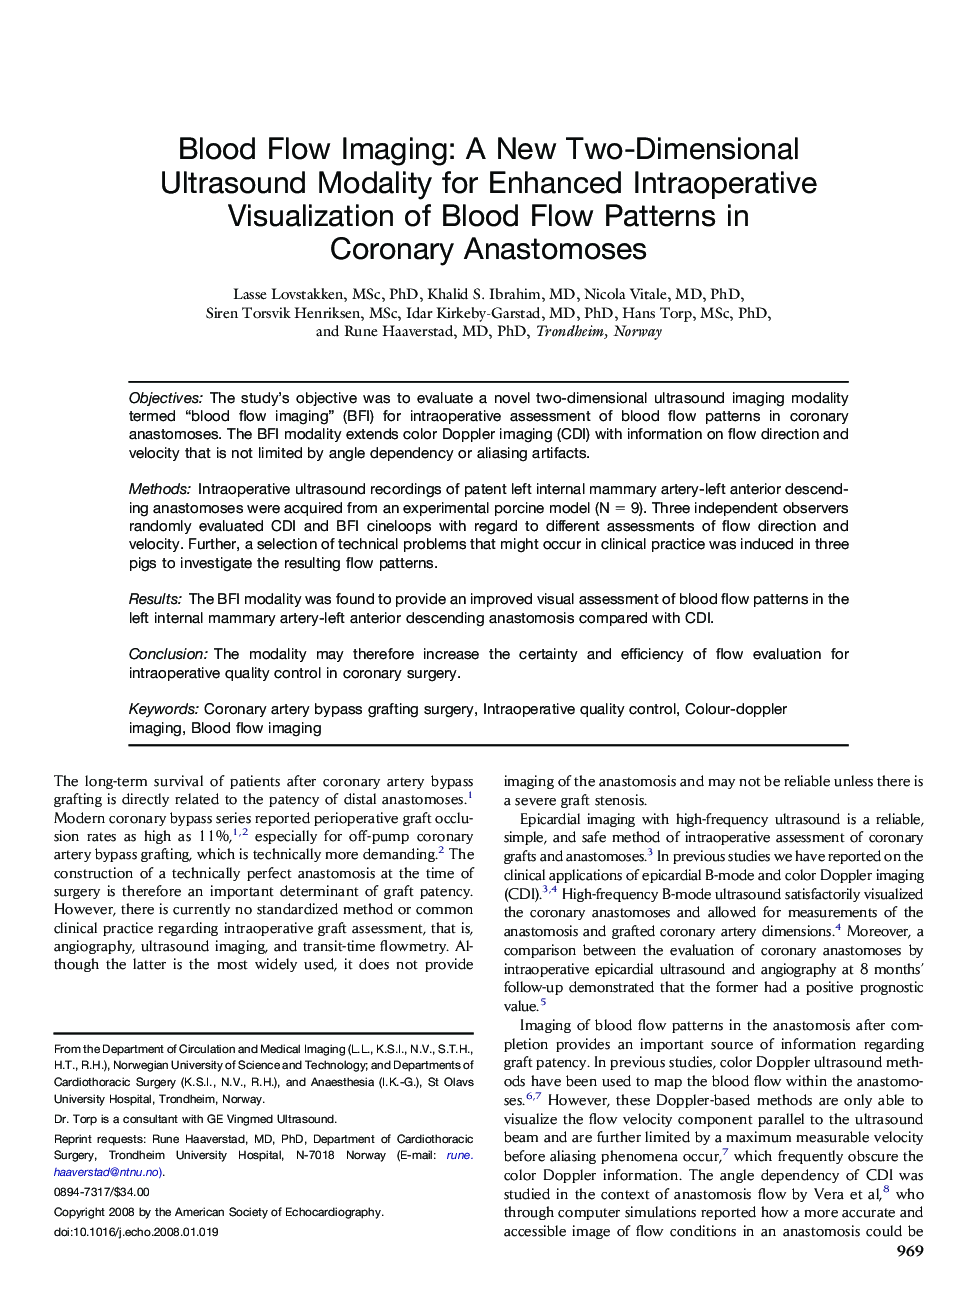 Blood Flow Imaging: A New Two-Dimensional Ultrasound Modality for Enhanced Intraoperative Visualization of Blood Flow Patterns in Coronary Anastomoses